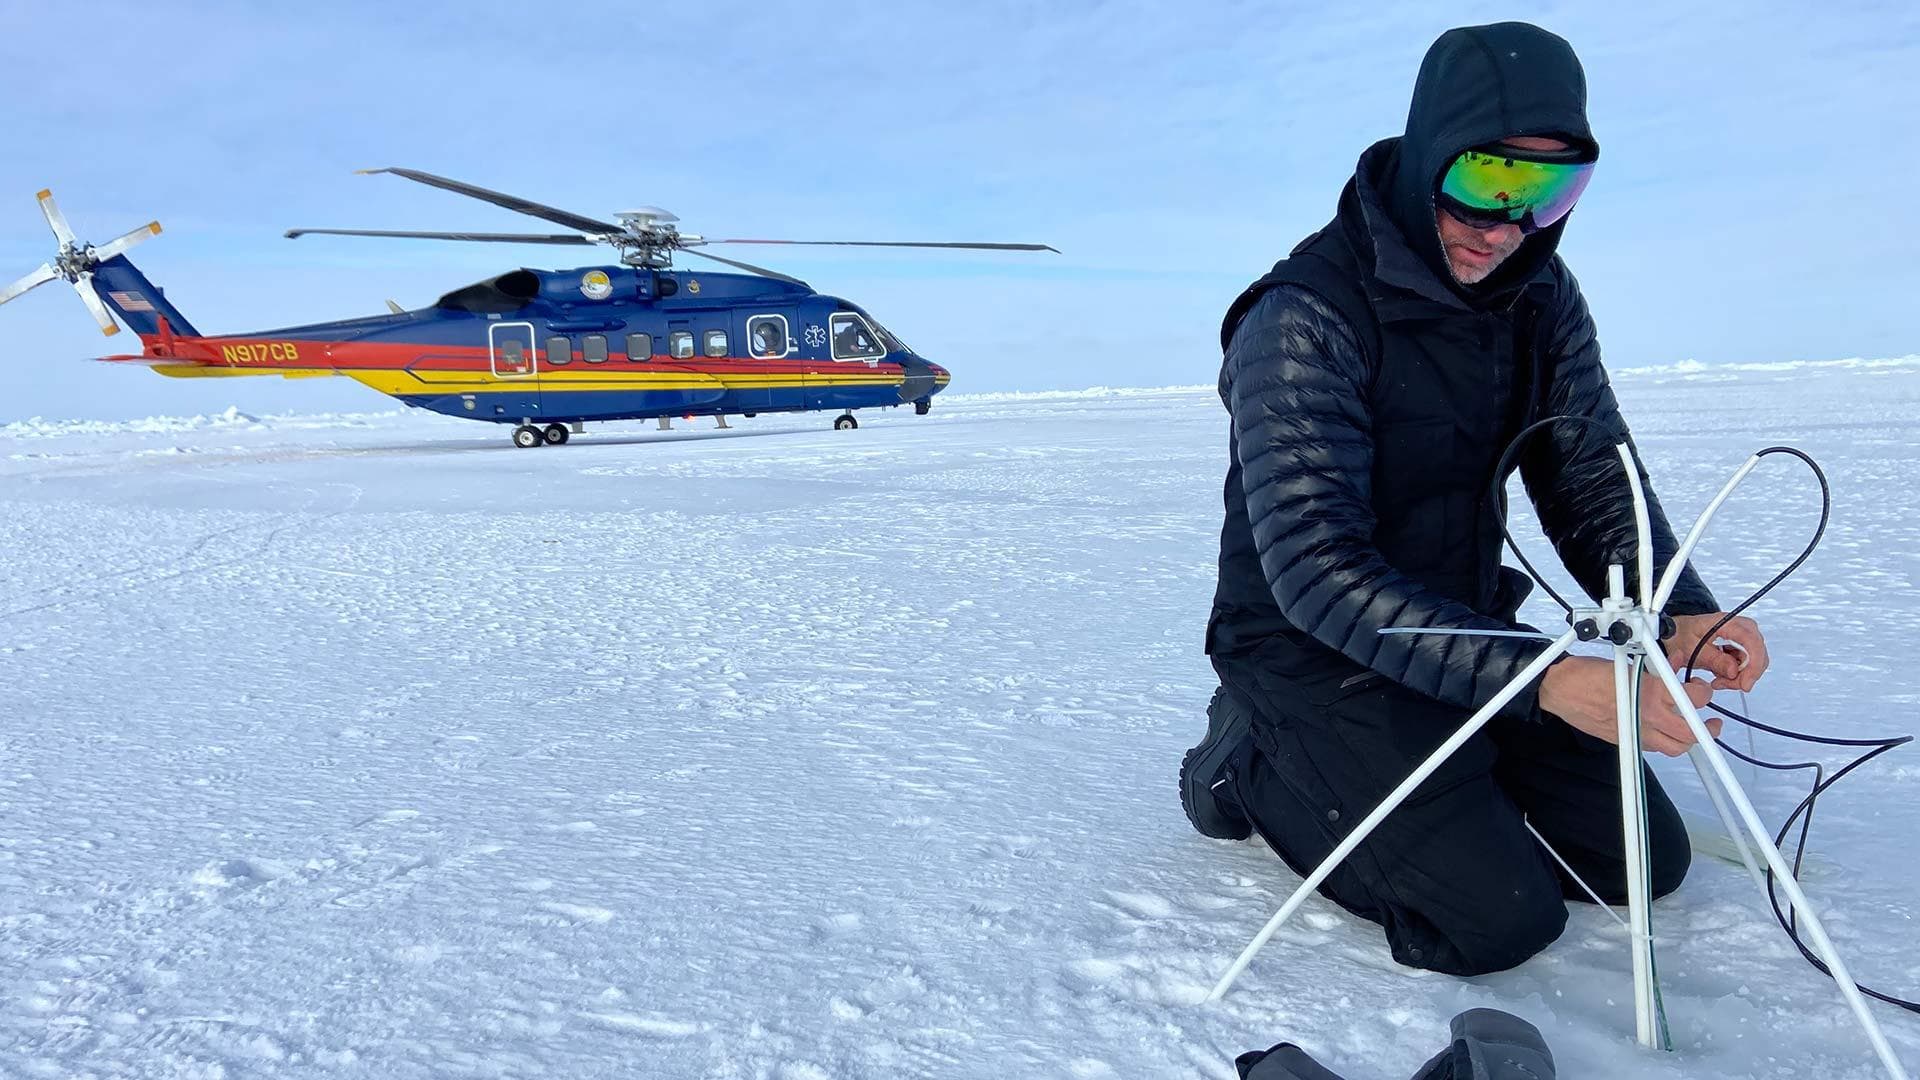 Cy Keener works in Arctic with helicopter in background